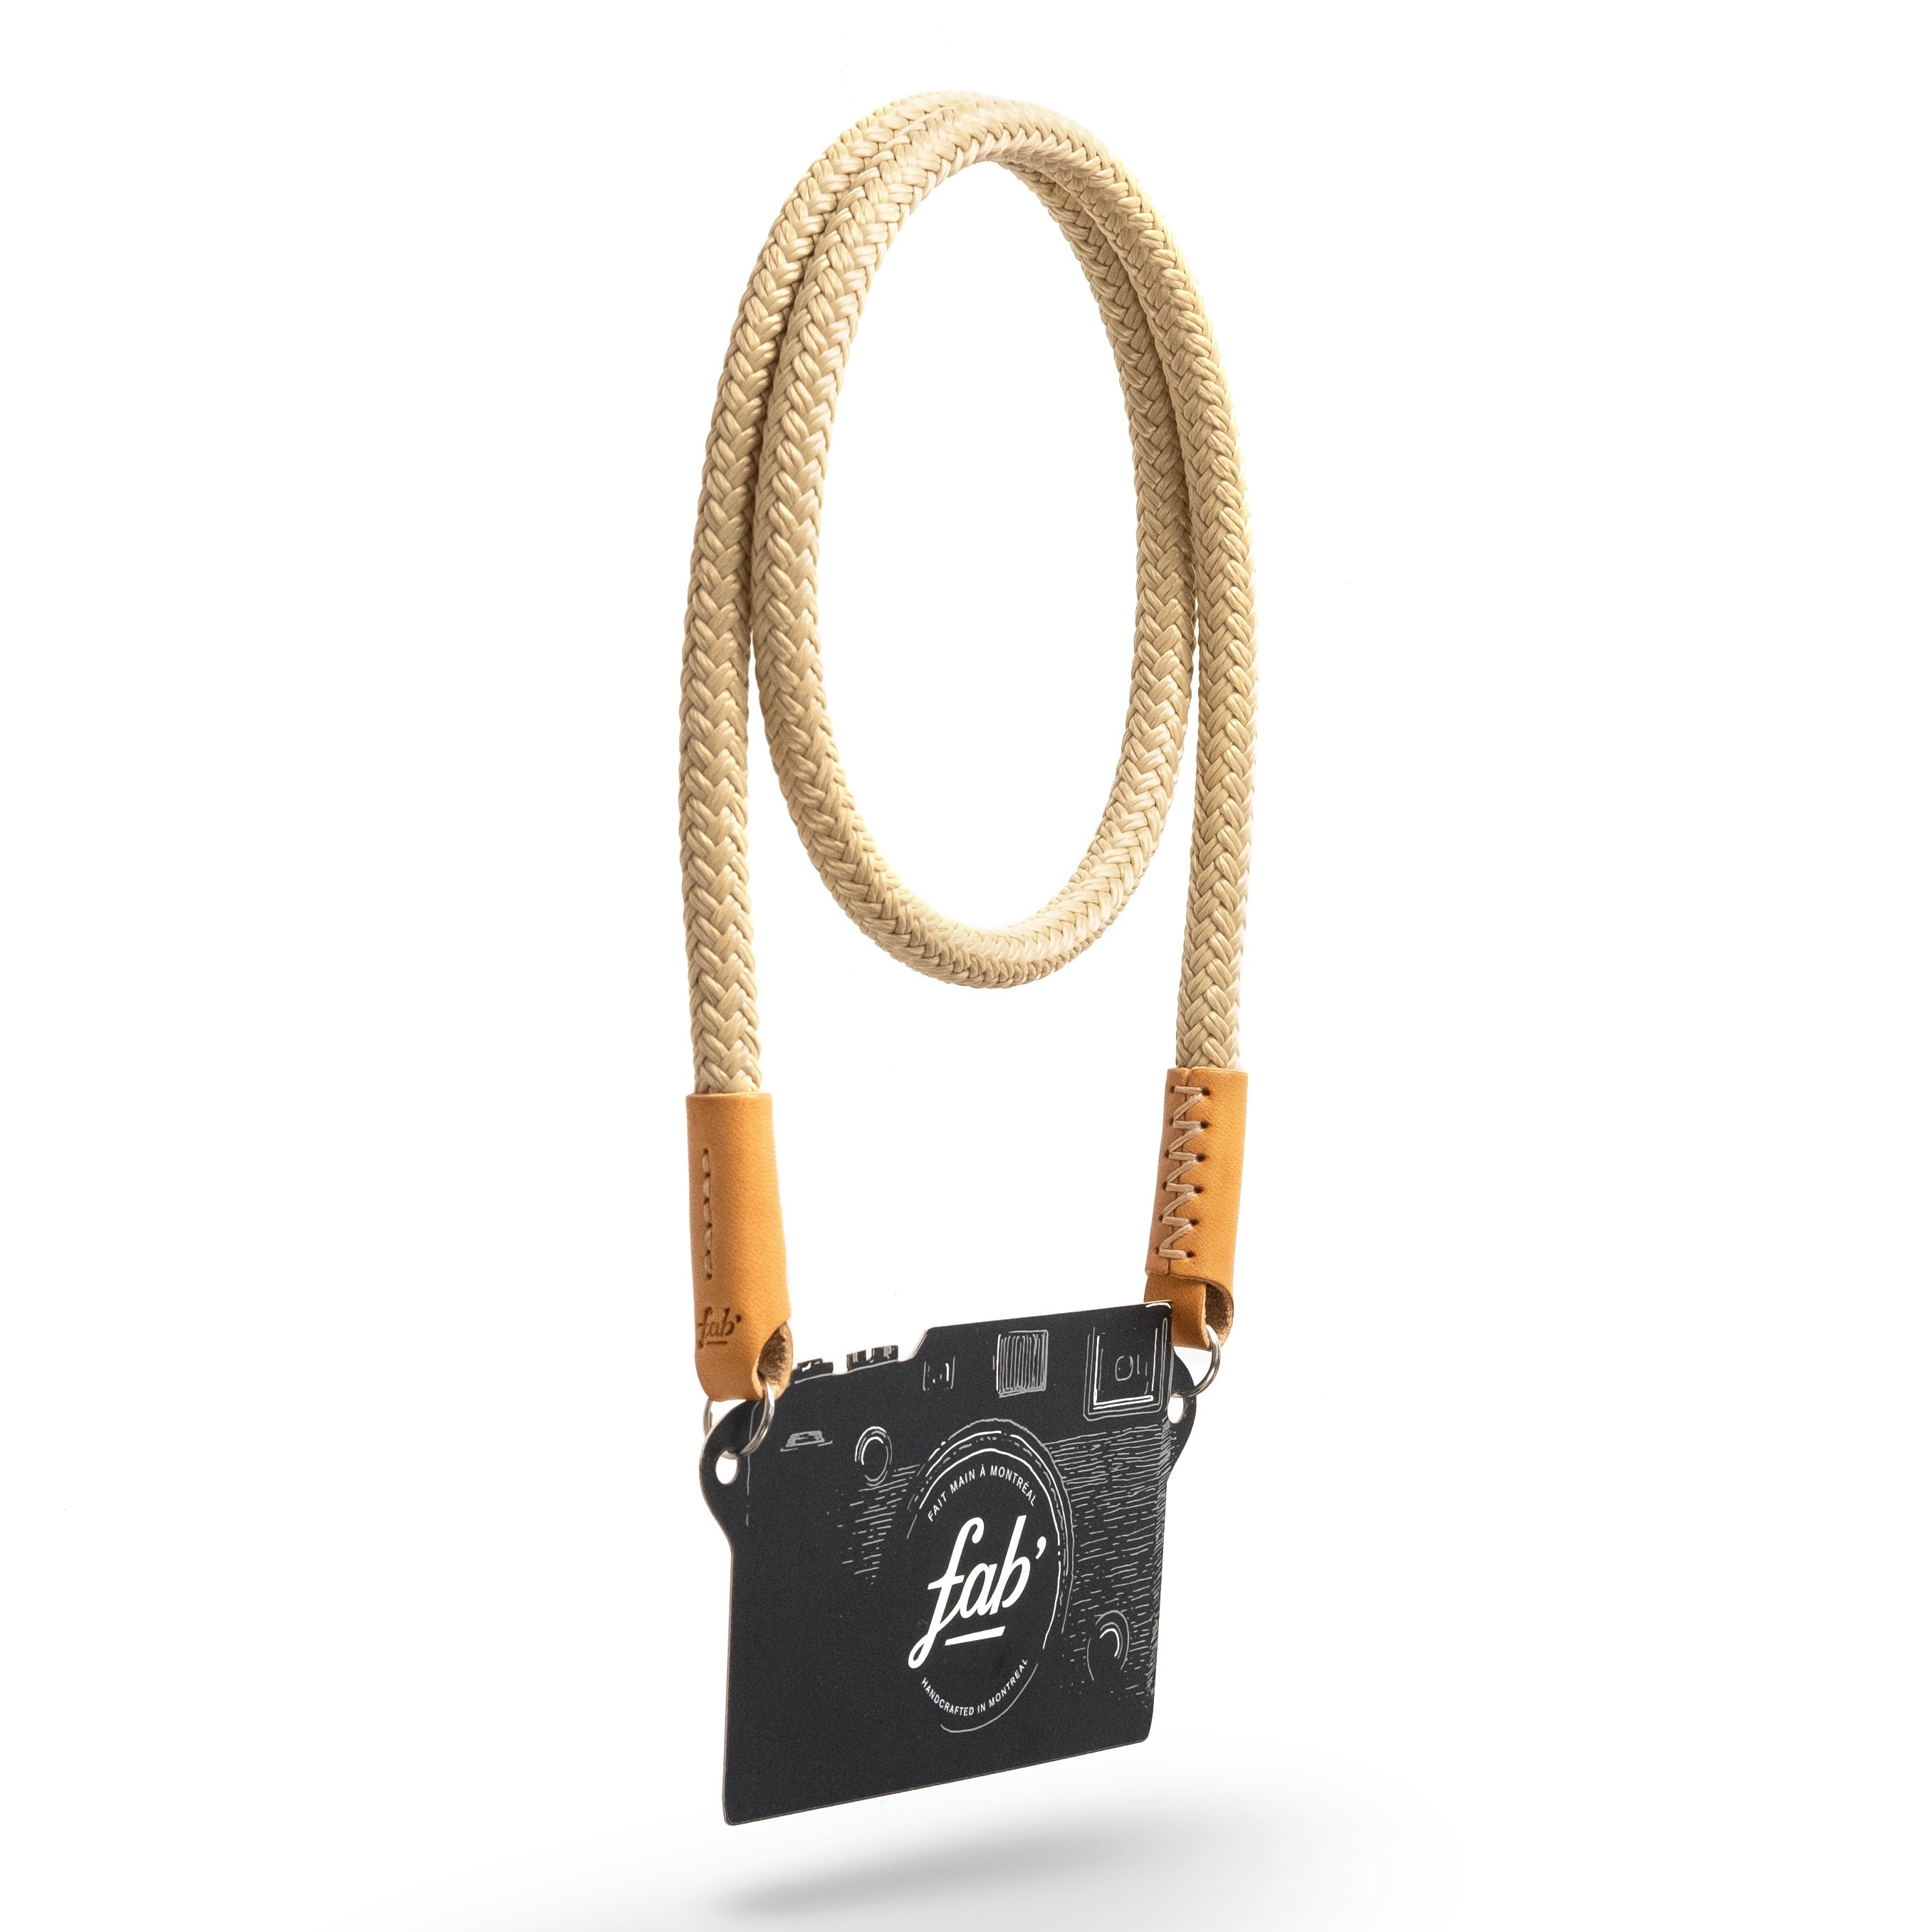 Fab' F8 strap - Tan rope & leather - Size XL (55")